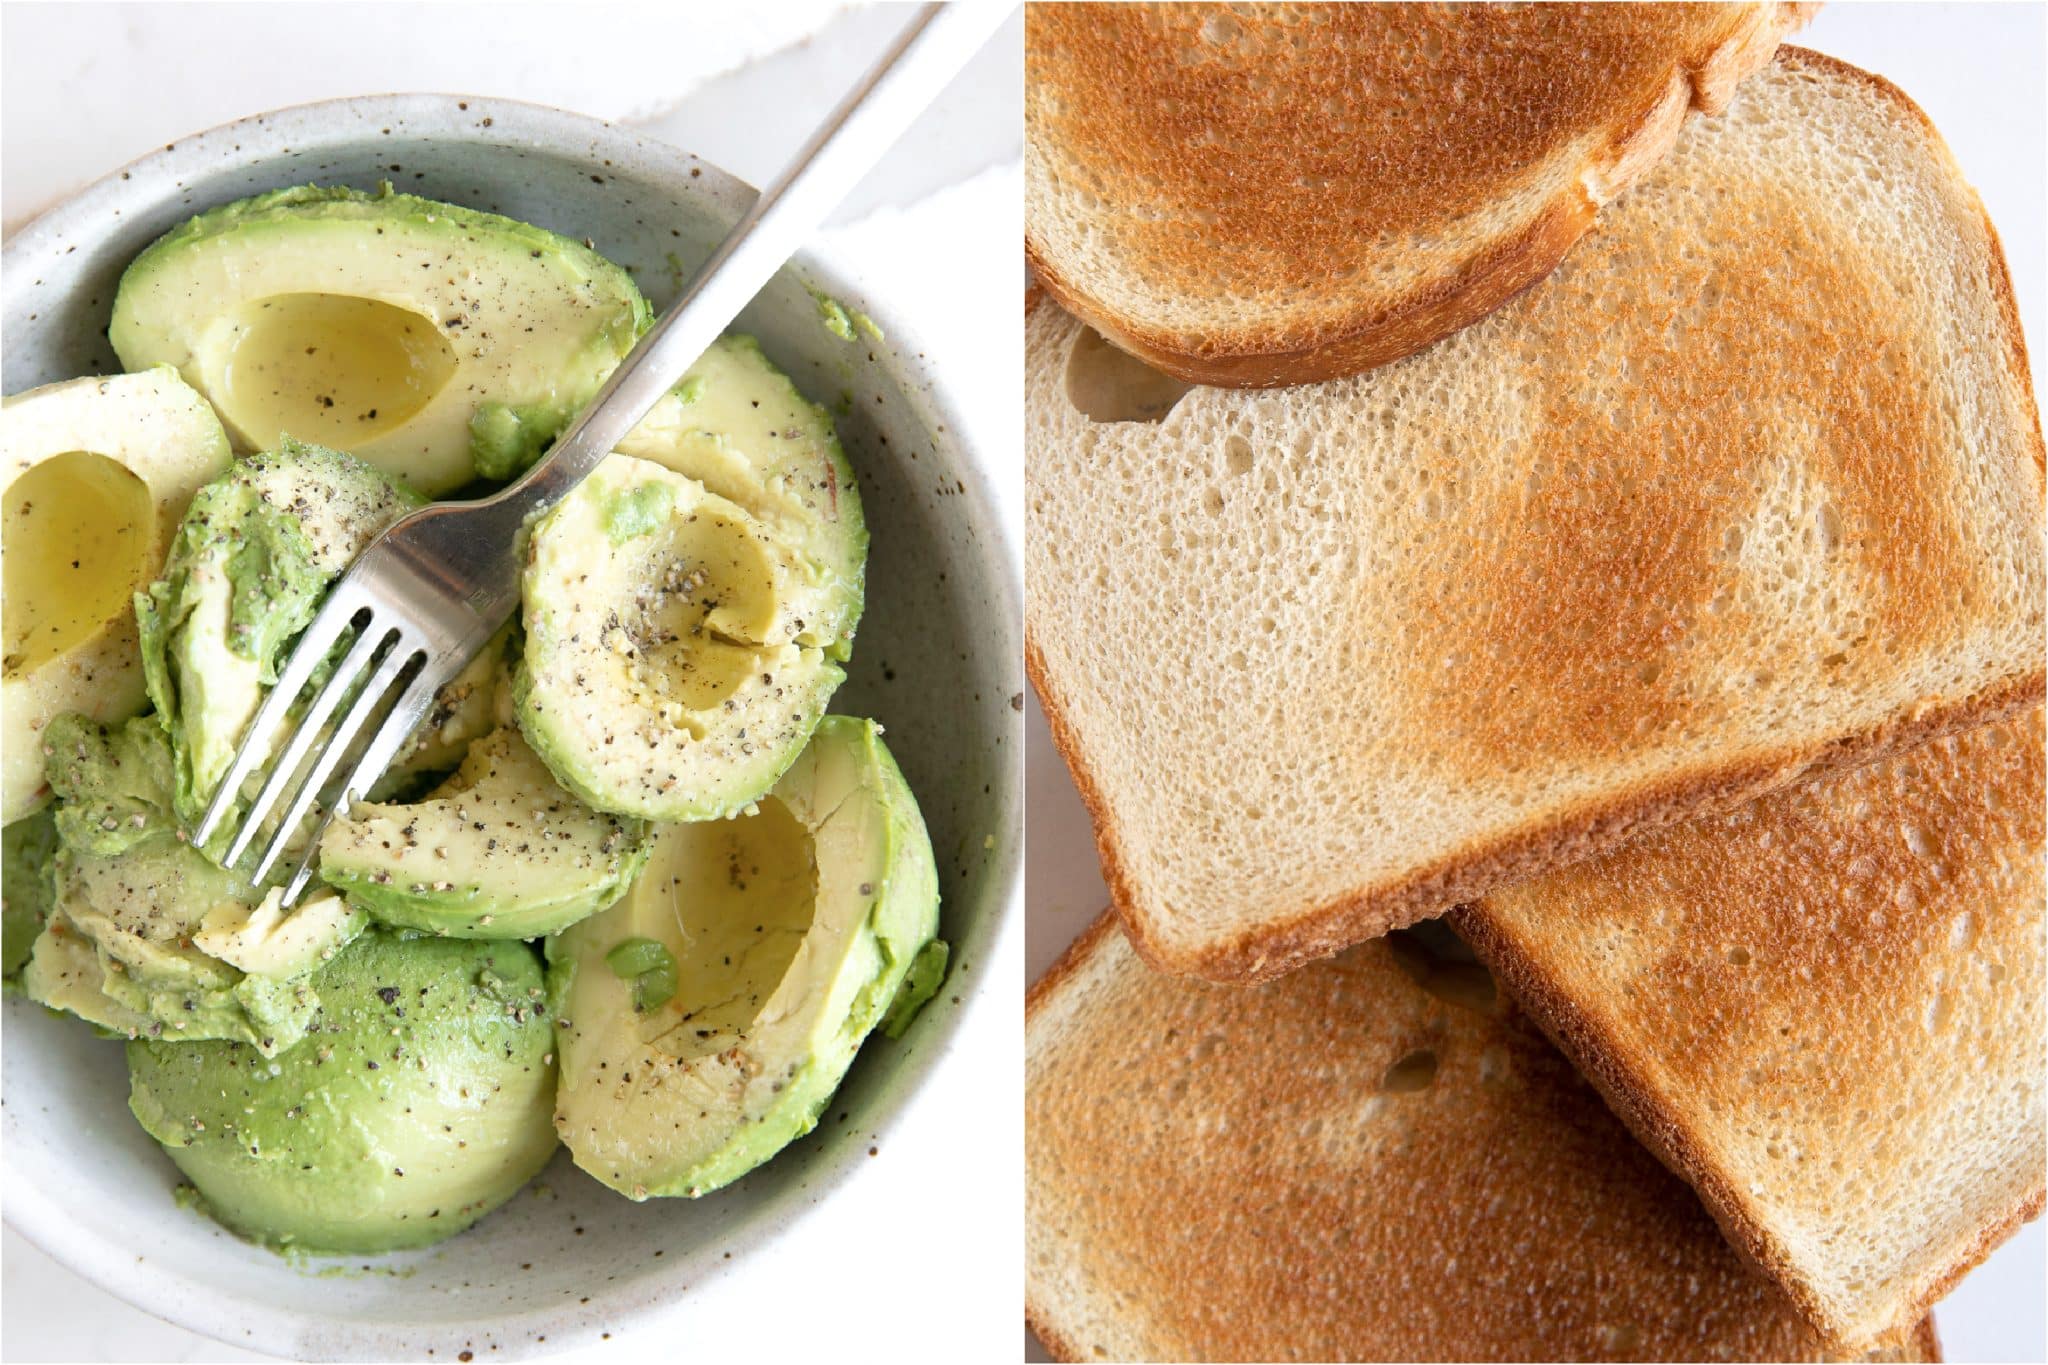 Two images one with smashed avocado mixed with lemon juice and black pepper and the other image showing four pieces of toasted bread.